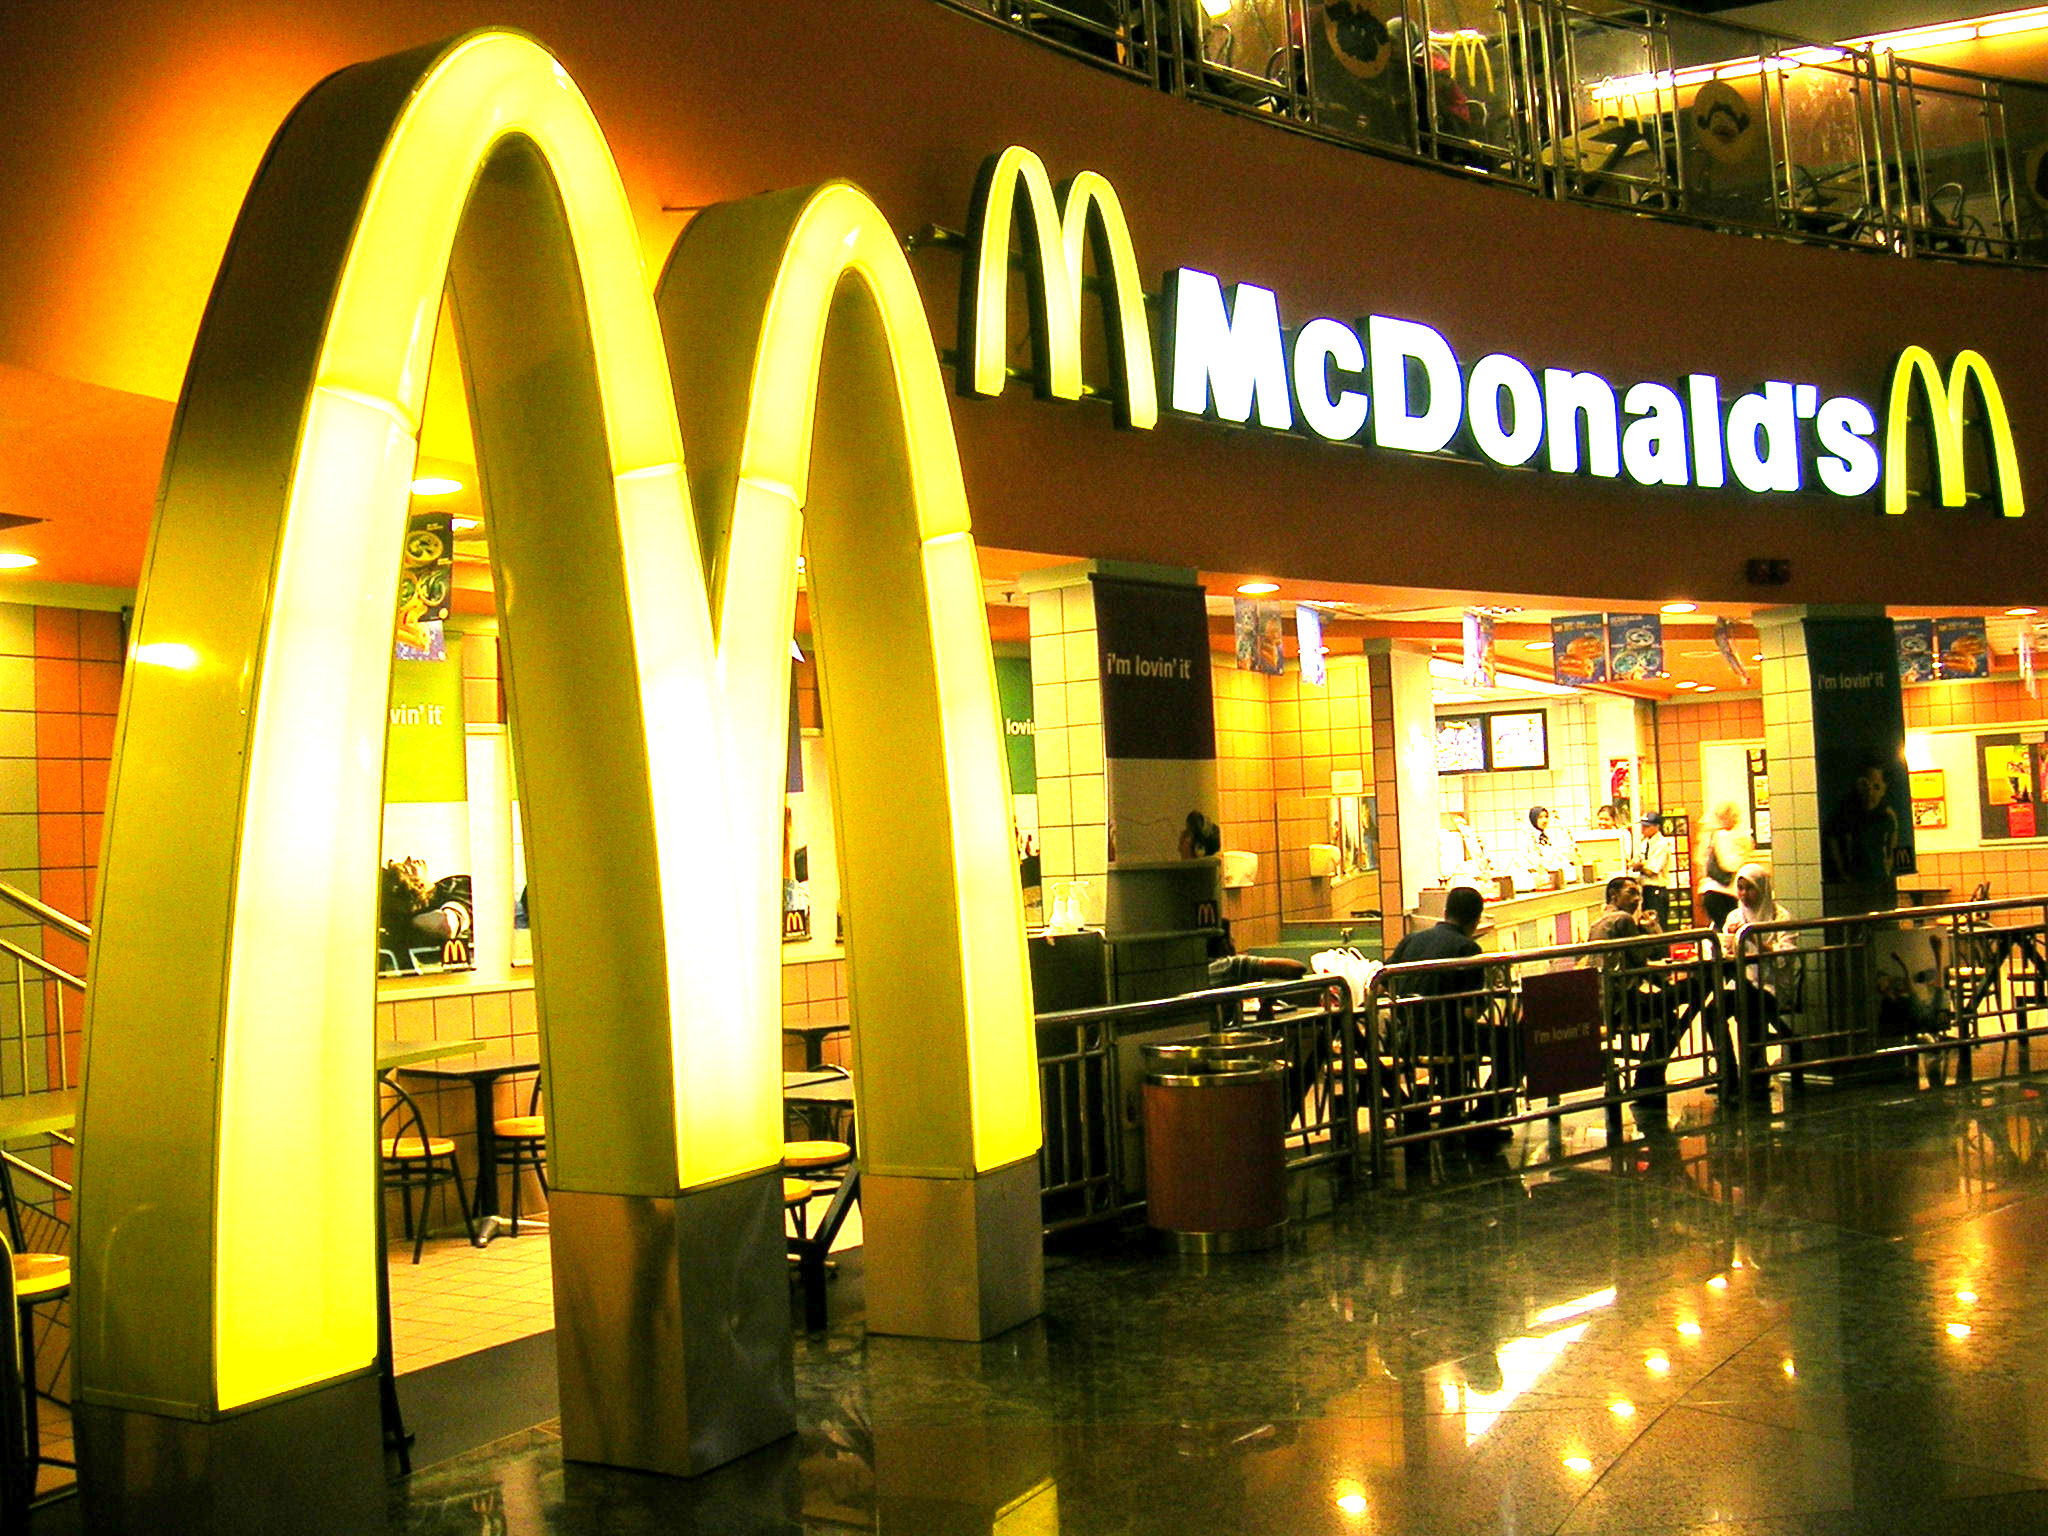 McDonald’s Fires Its CEO Over Inappropriate Relationship